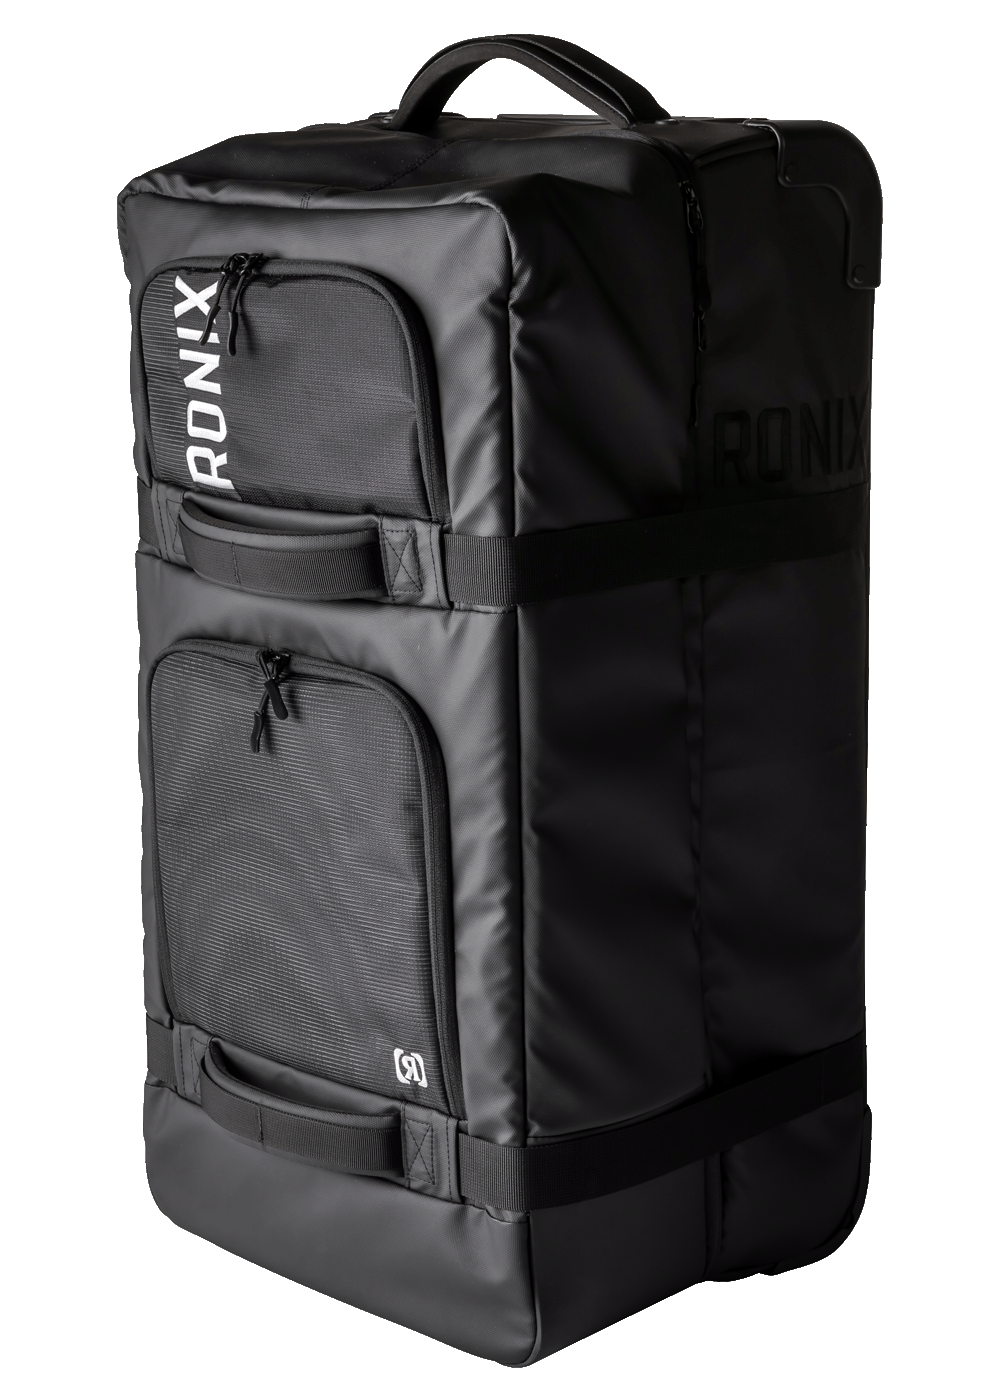 2022 Ronix Bags Transfer Travel Luggage Front 3-4 copy